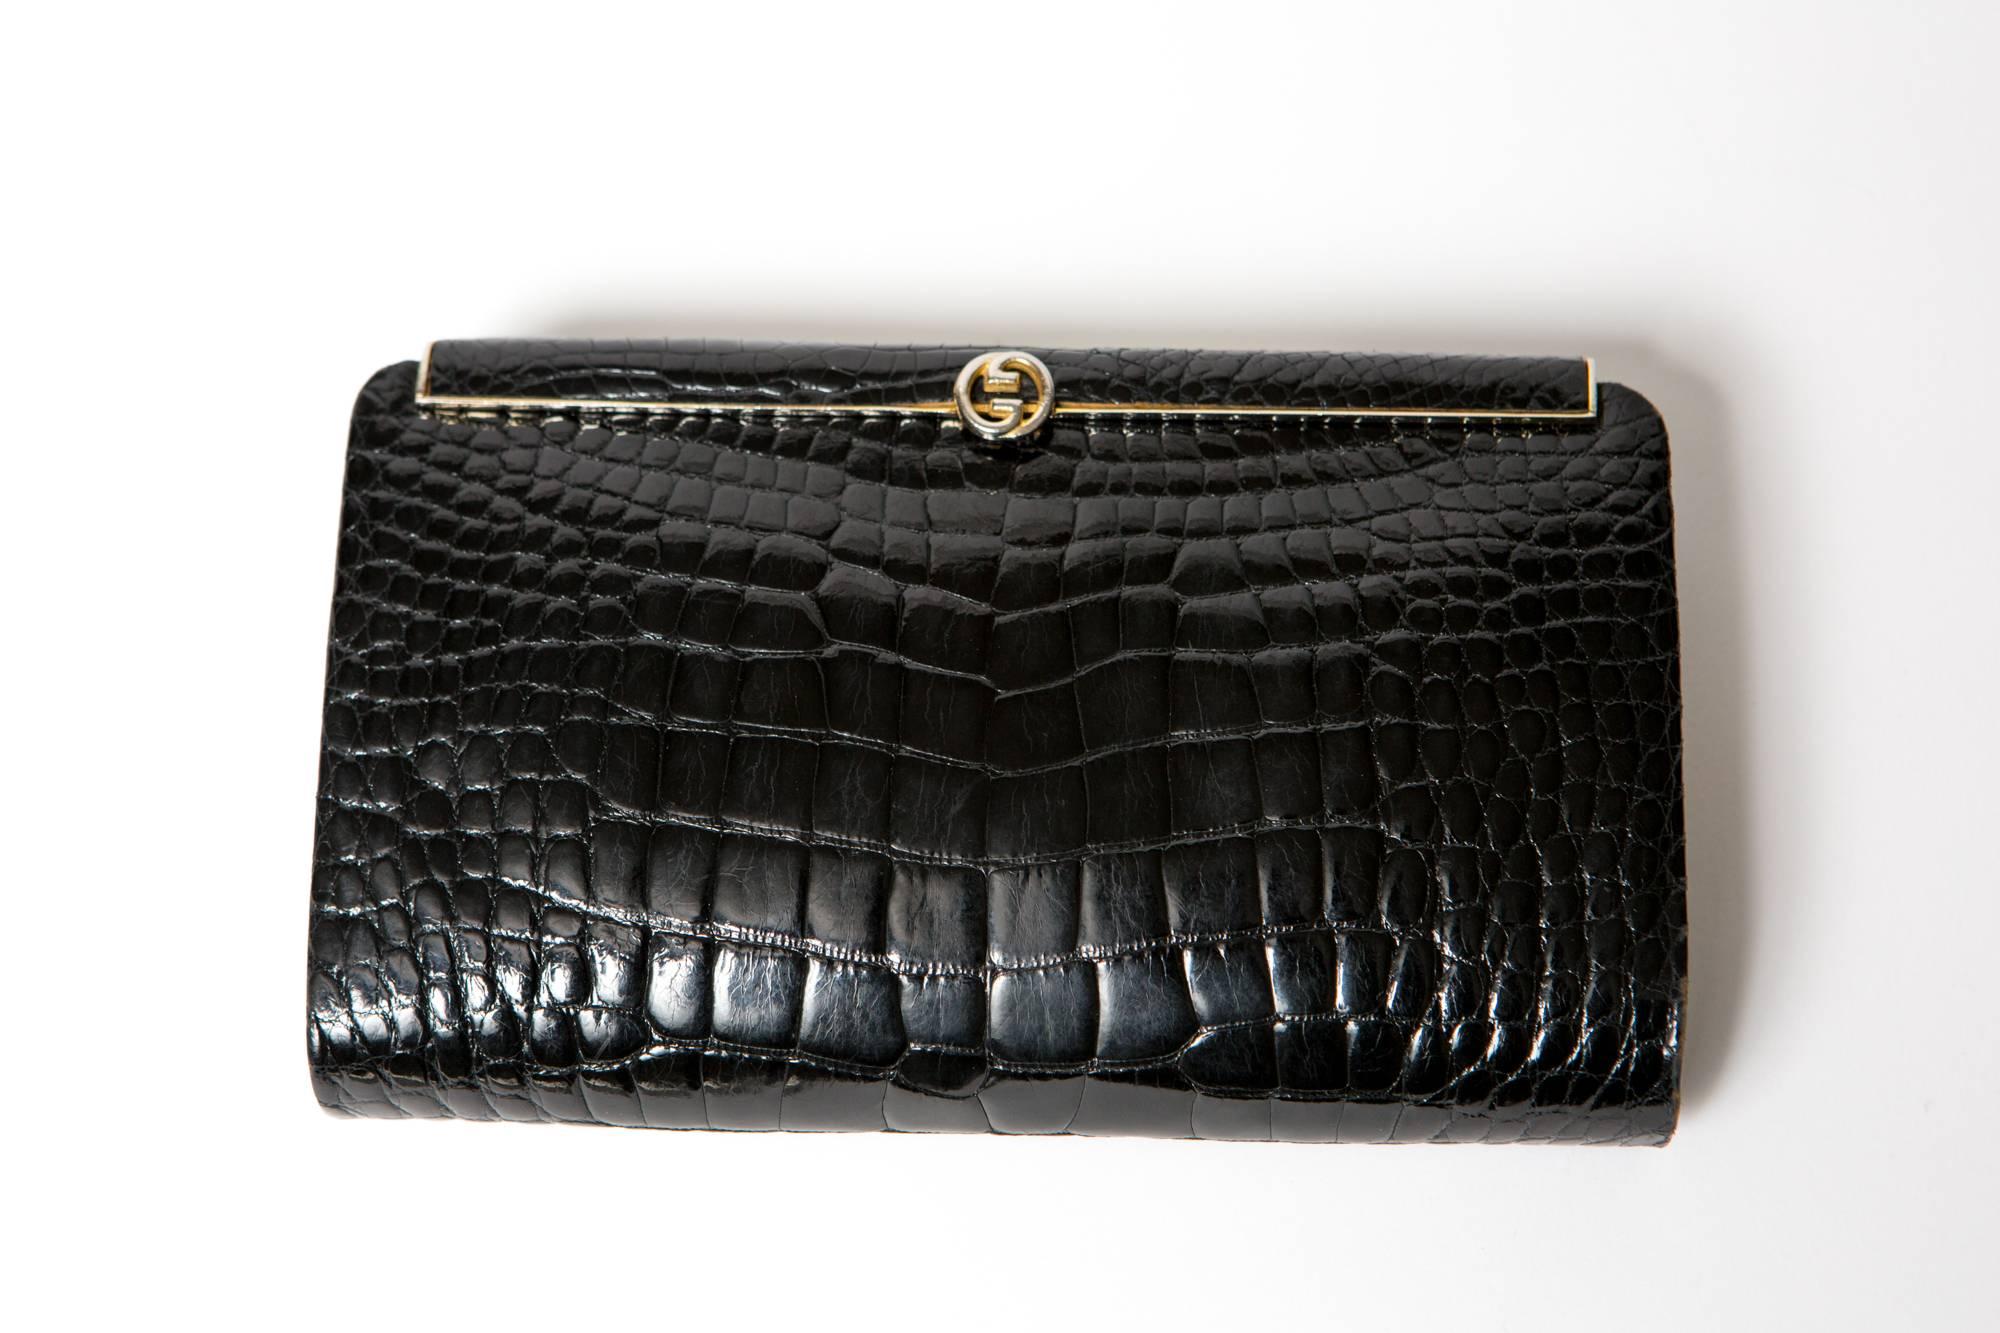 Gorgeous Gucci black  porosus crocodile leather clutch featuring a detachable gold tone chain (Length:43,3 in. (110cm)), could be used as a shoulder bag or as a clutch.
7.8in. (20cm) X  5.5in. (14cm) X 1,5in. ( 4cm)
In excellent vintage condition.